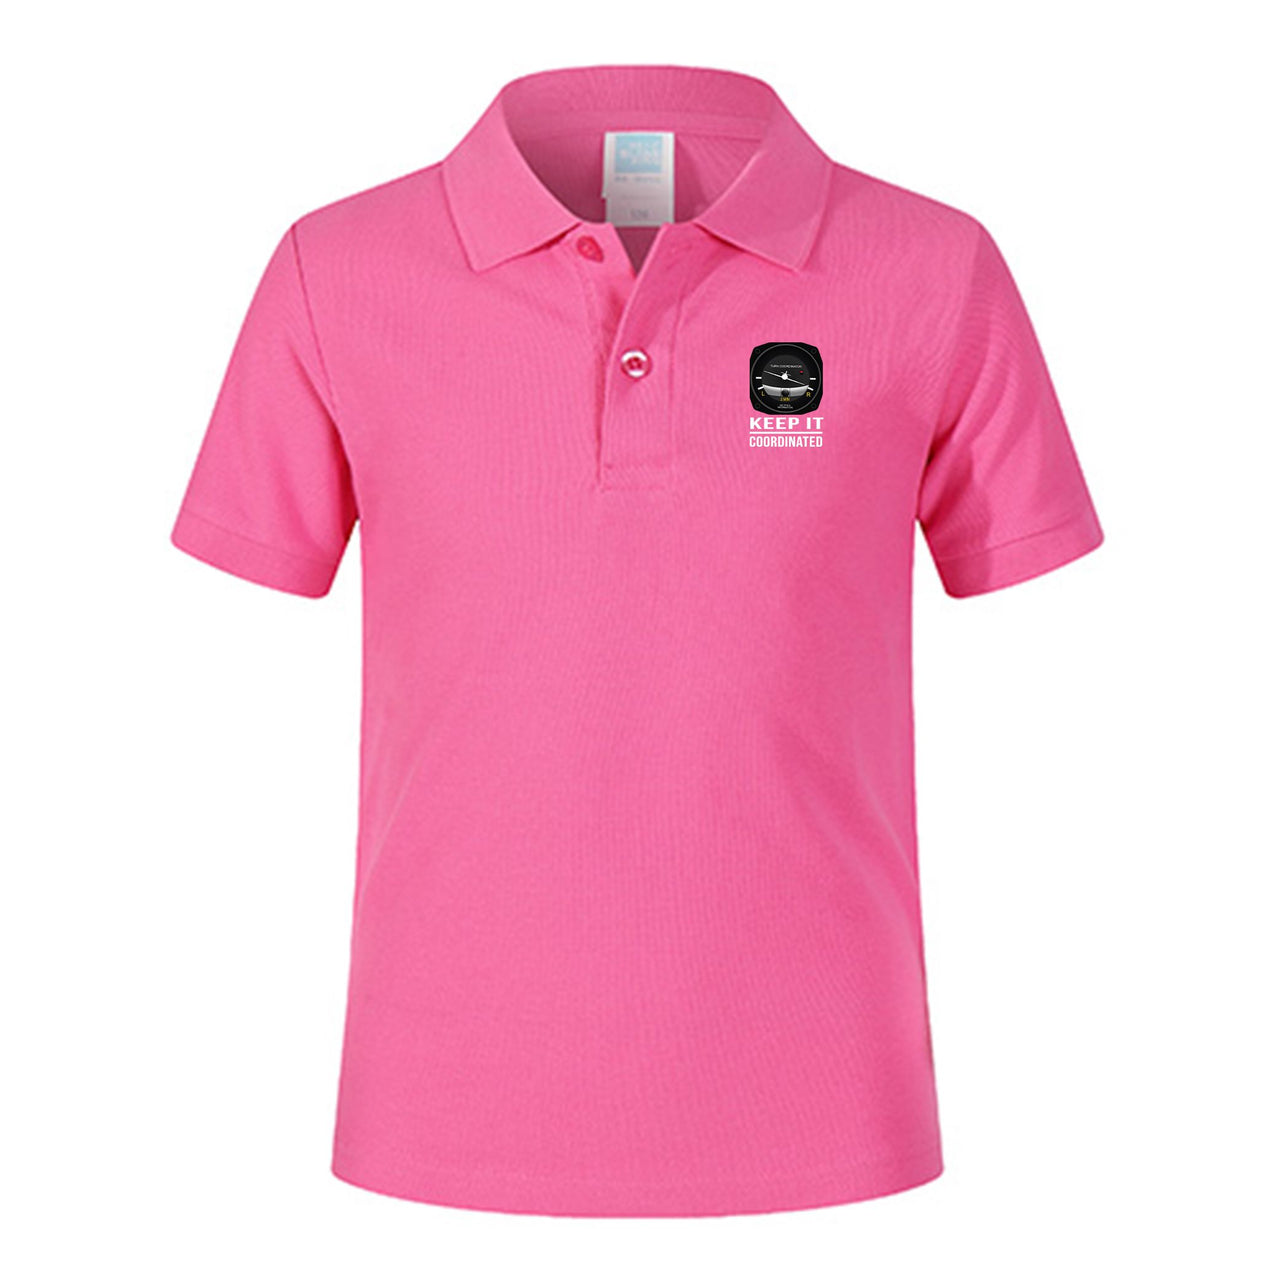 Keep It Coordinated Designed Children Polo T-Shirts